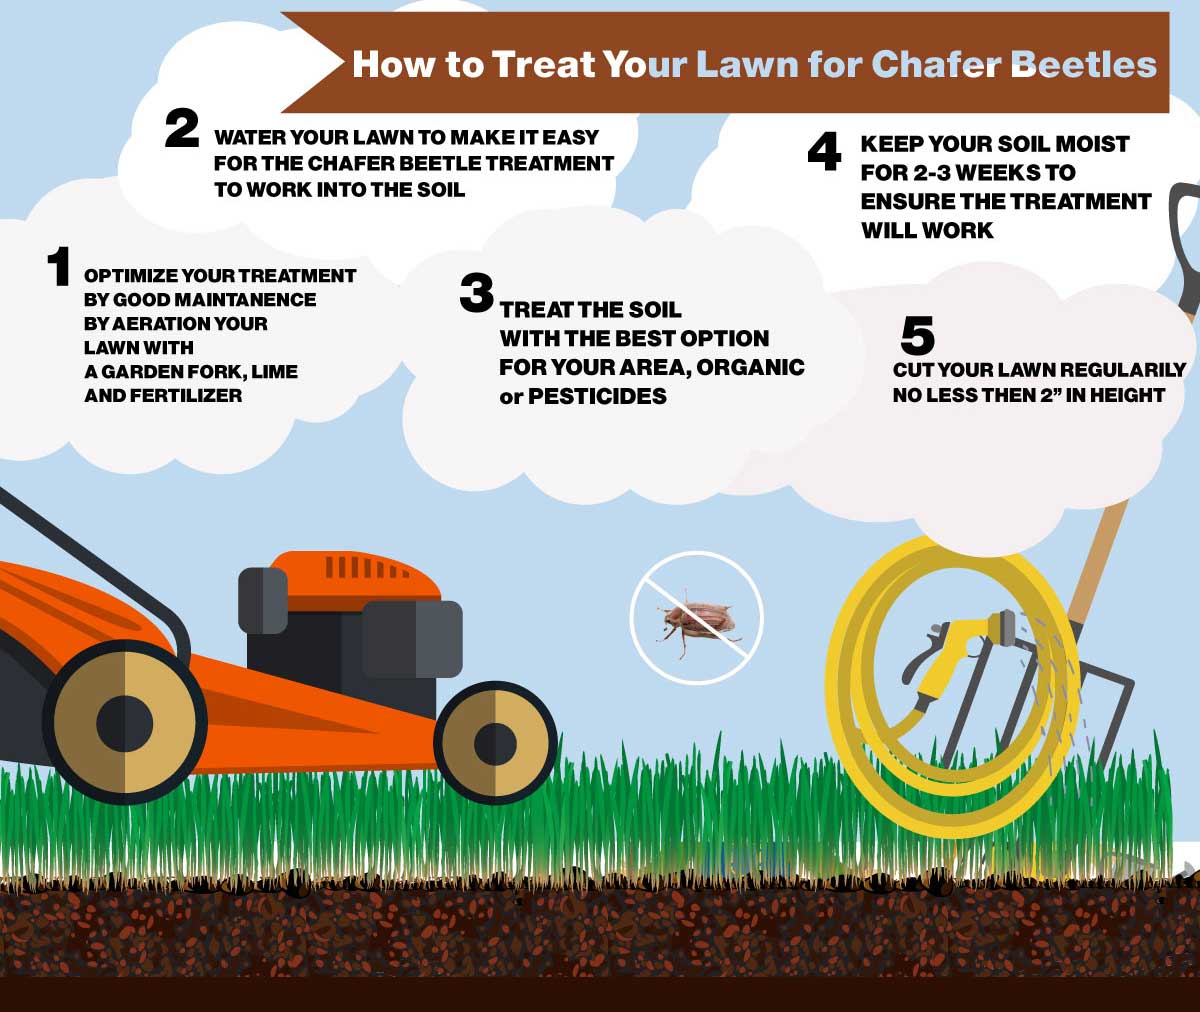 How to Treat your Lawn for the Chafer Beetle - Infographic